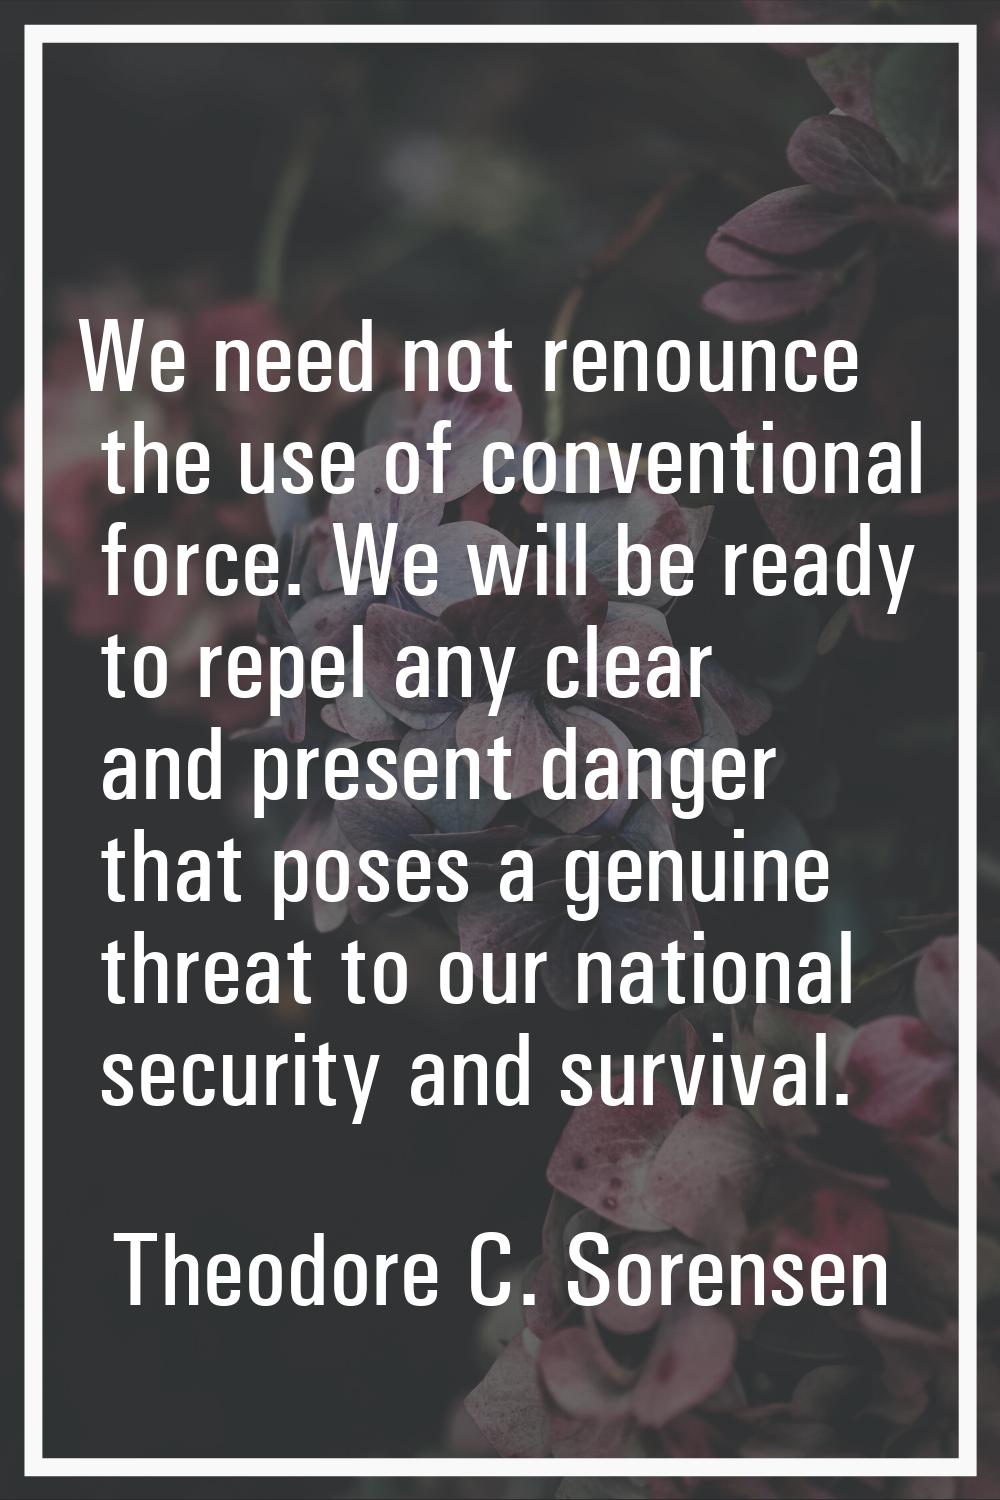 We need not renounce the use of conventional force. We will be ready to repel any clear and present